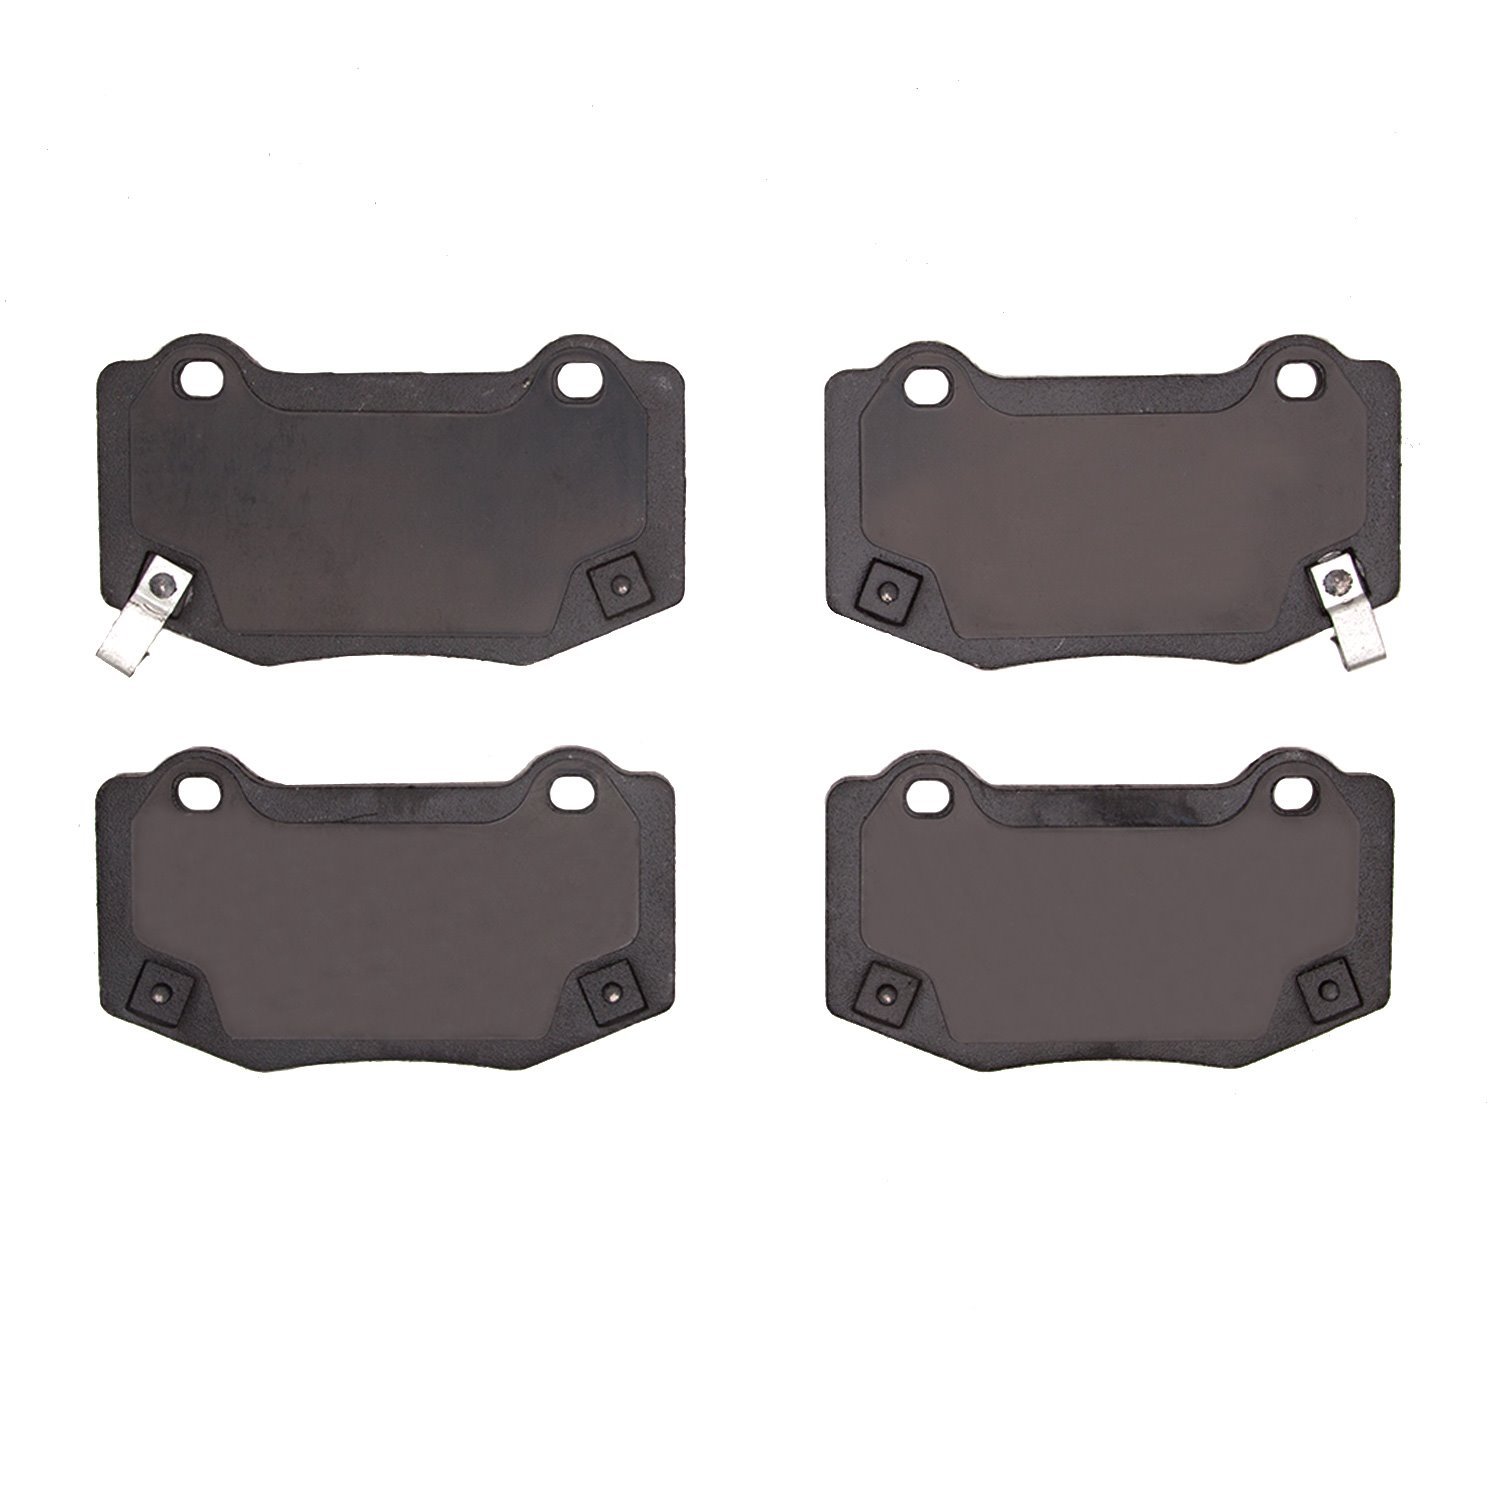 1310-1718-00 3000-Series Ceramic Brake Pads, Fits Select GM, Position: Rear